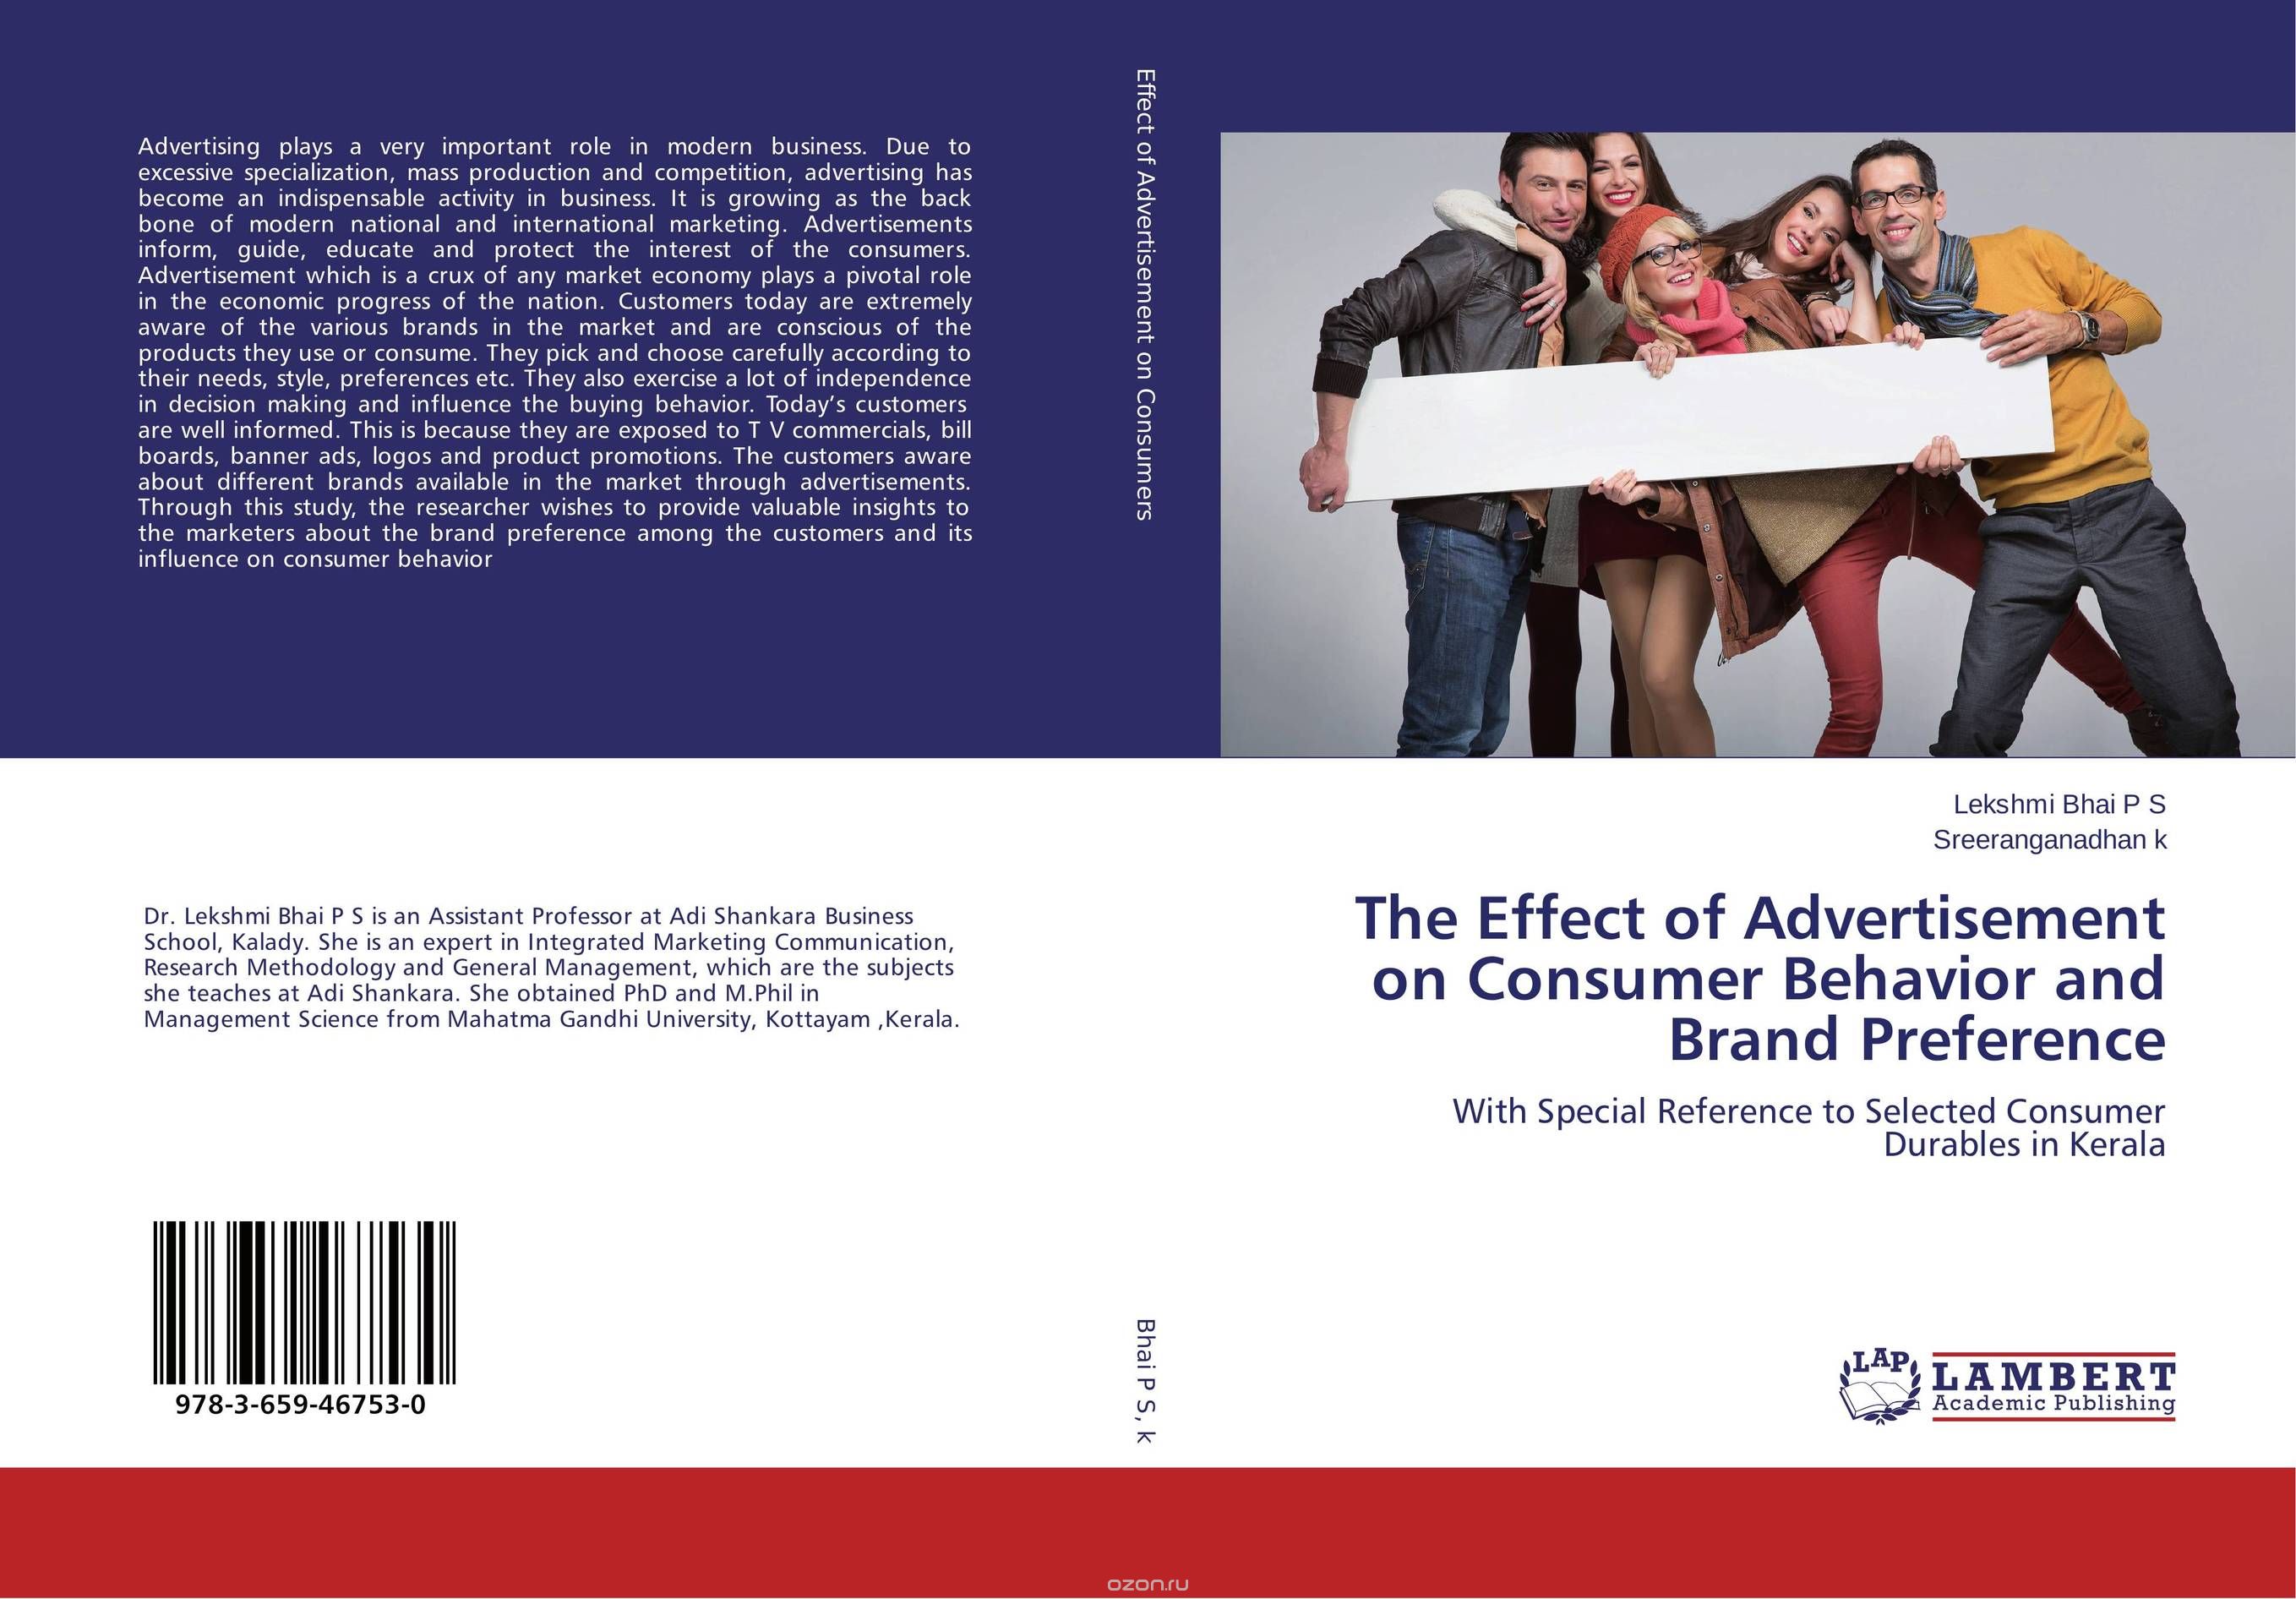 The Effect of Advertisement on Consumer Behavior and Brand Preference